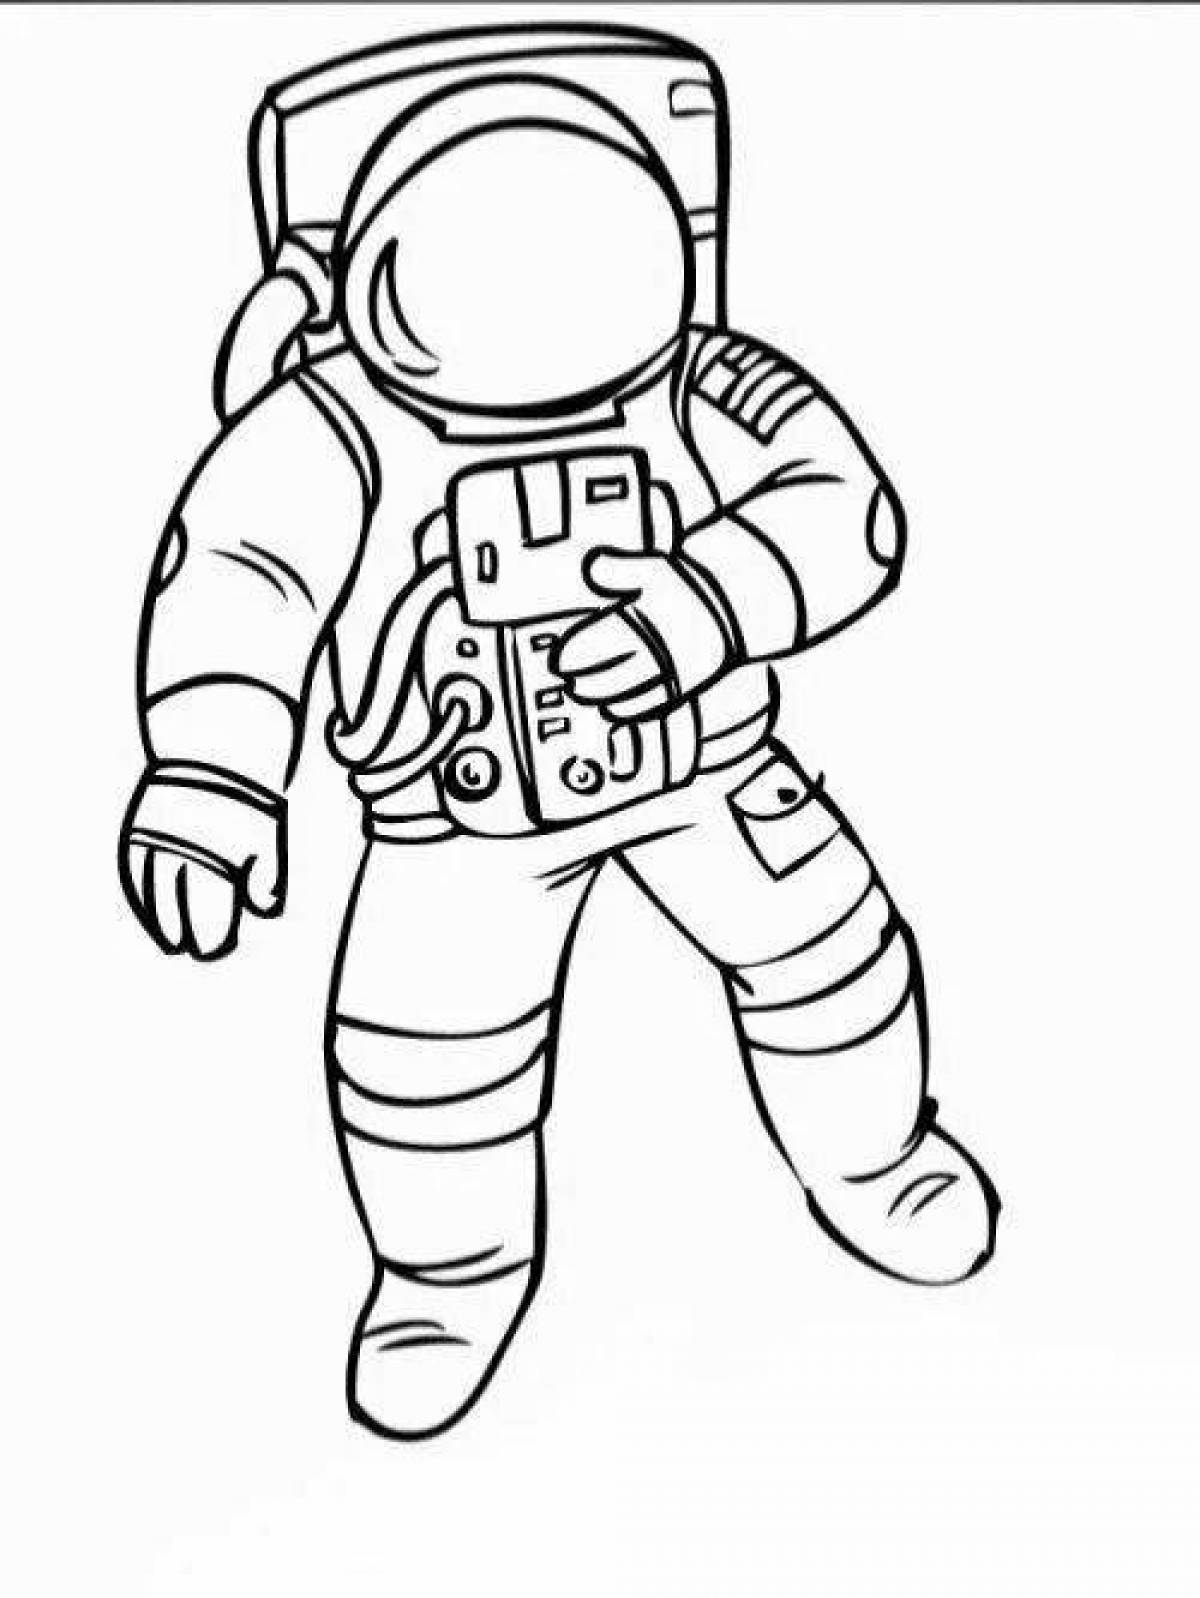 Adorable astronaut coloring book for kids